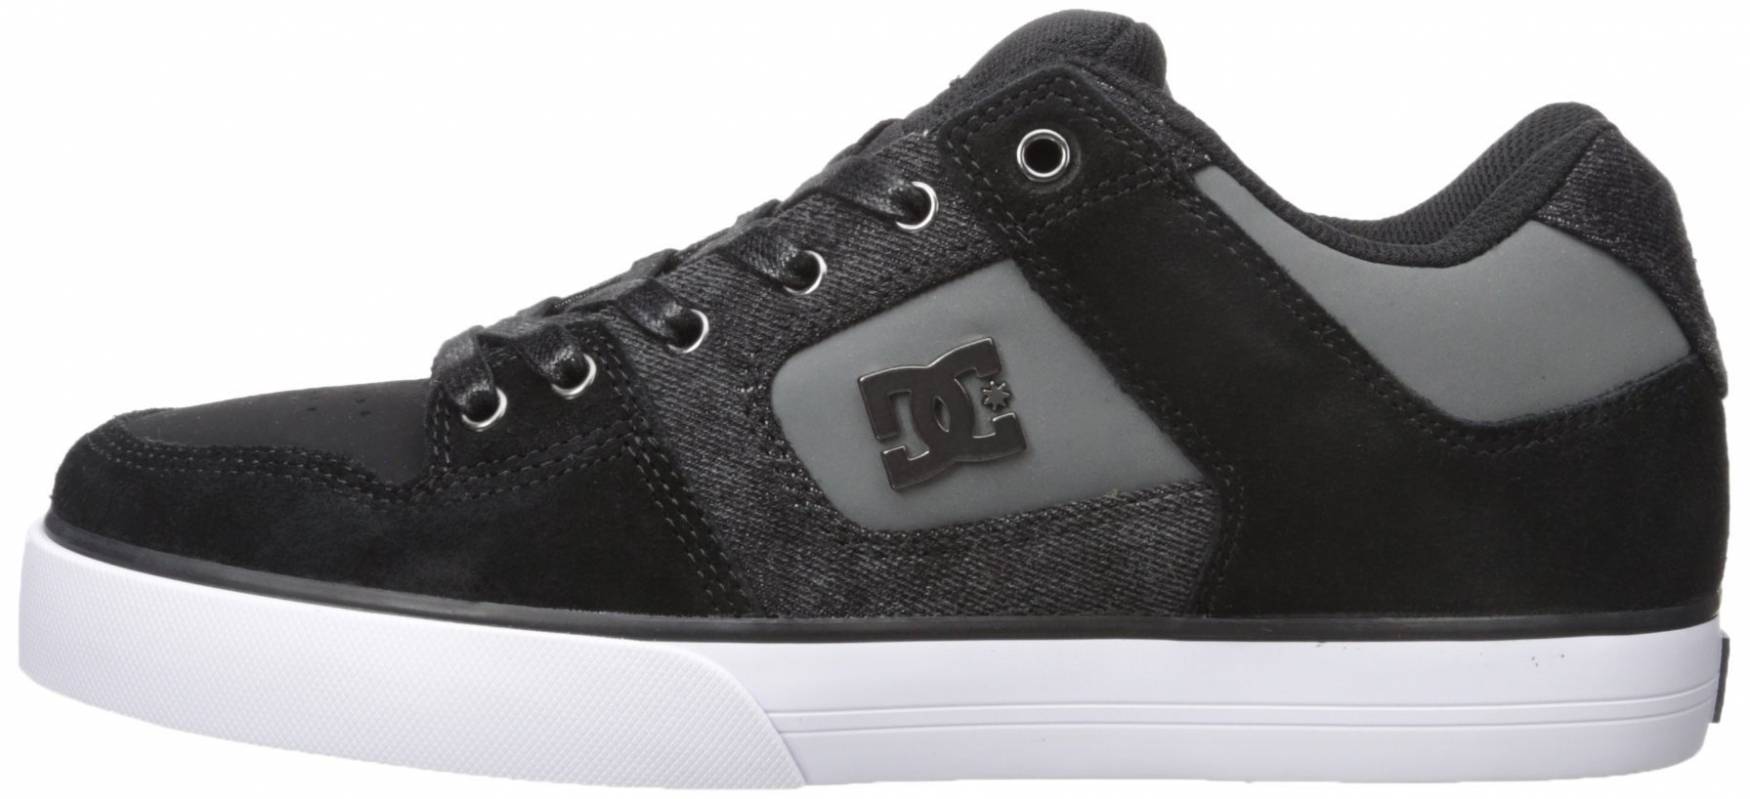 Save 49% on DC Skate Sneakers (81 